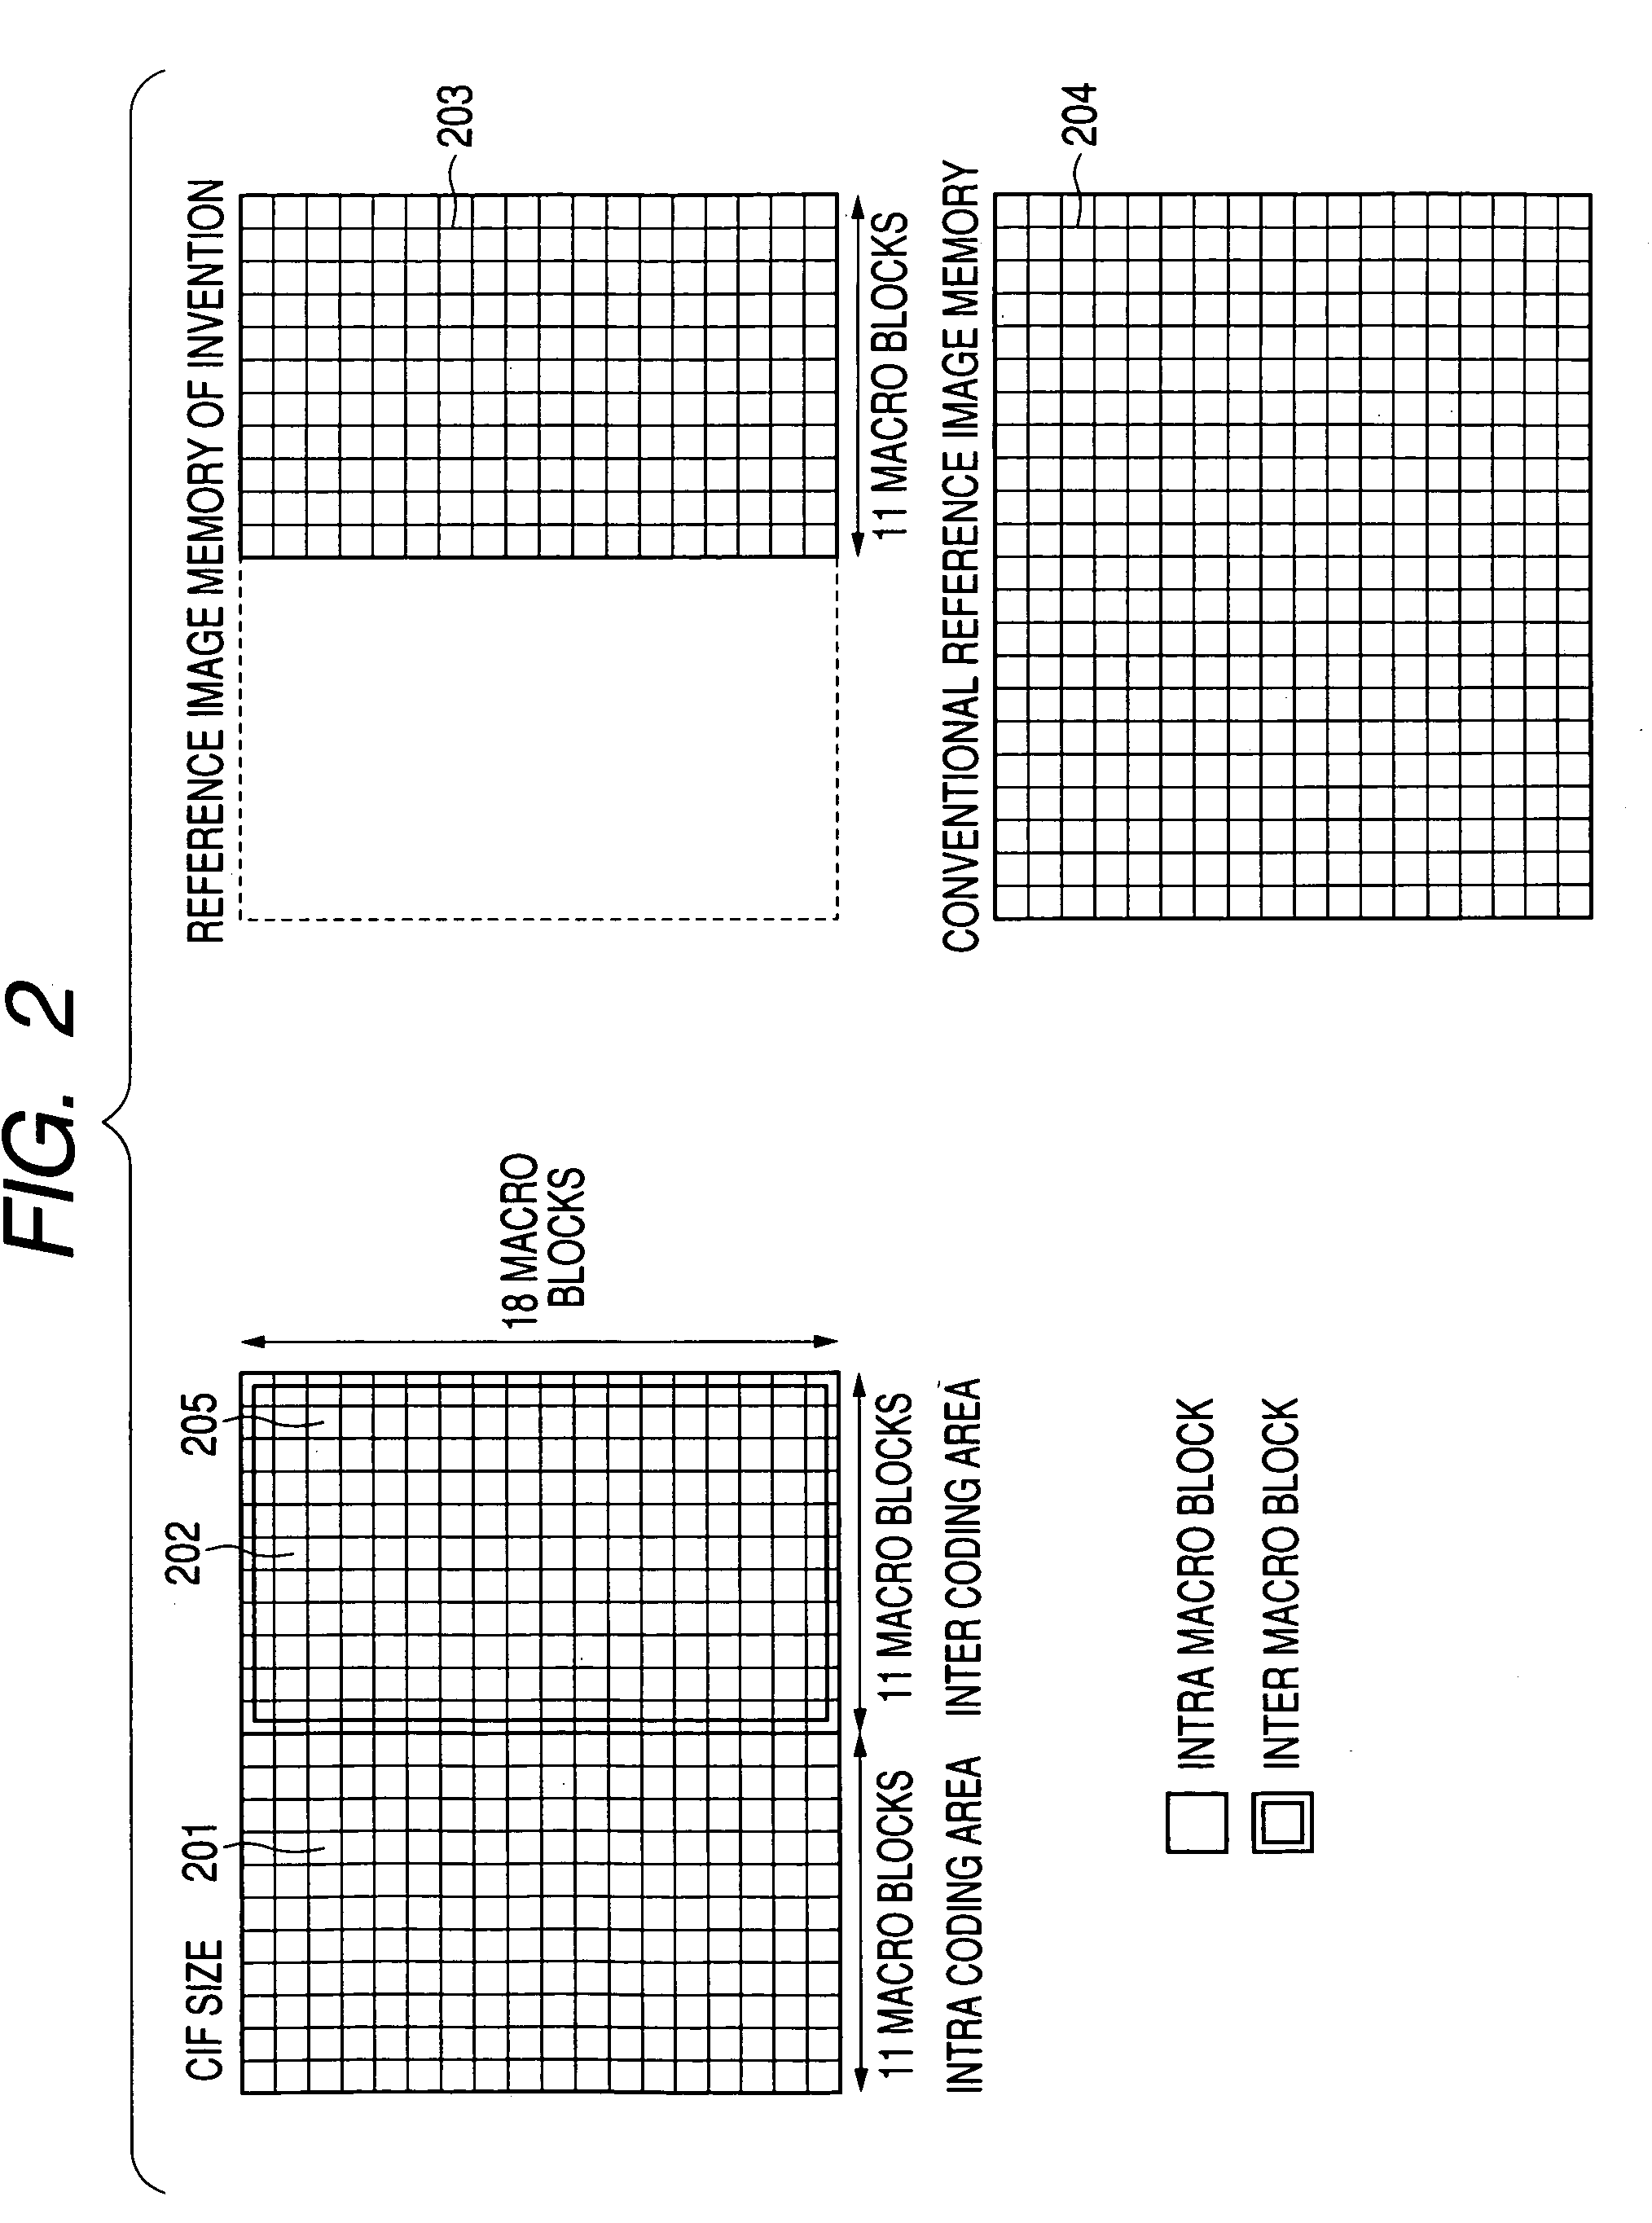 Moving image coding method and apparatus for determining a position of a macro block which is intra-coded or inter-coded